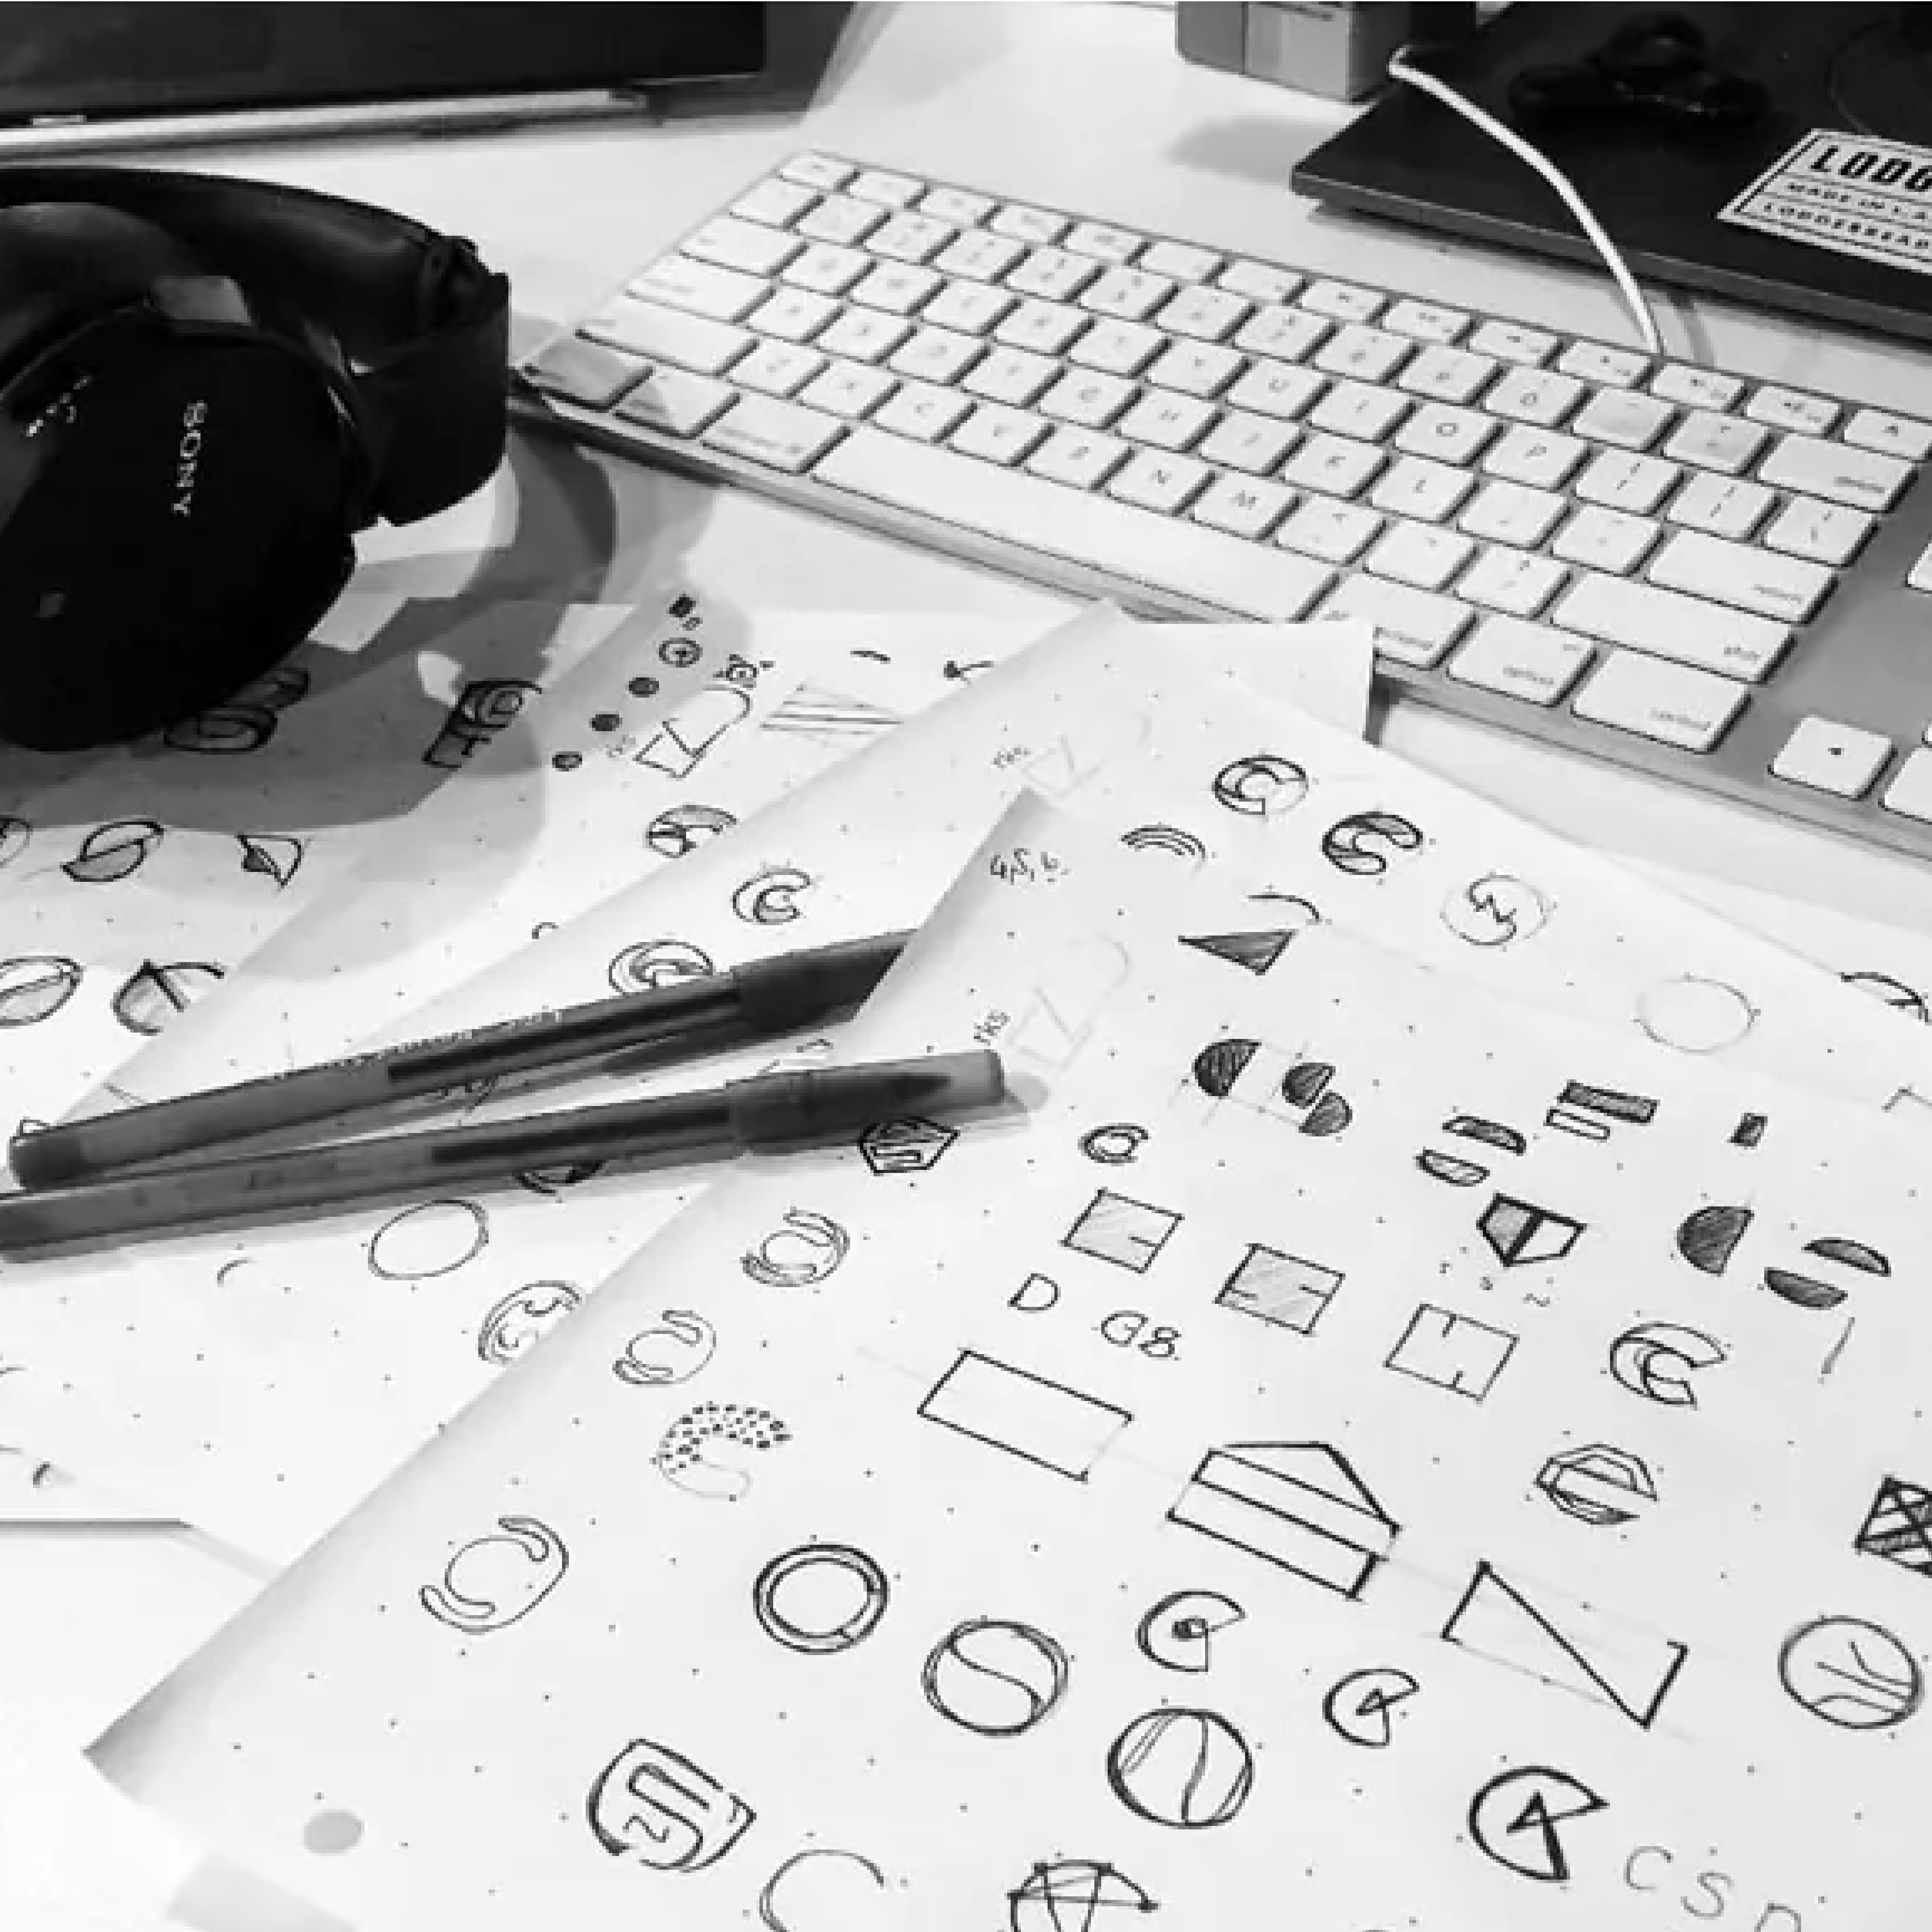 View of RKS Brand Strategy and Design Firm sketching iterations of logo design